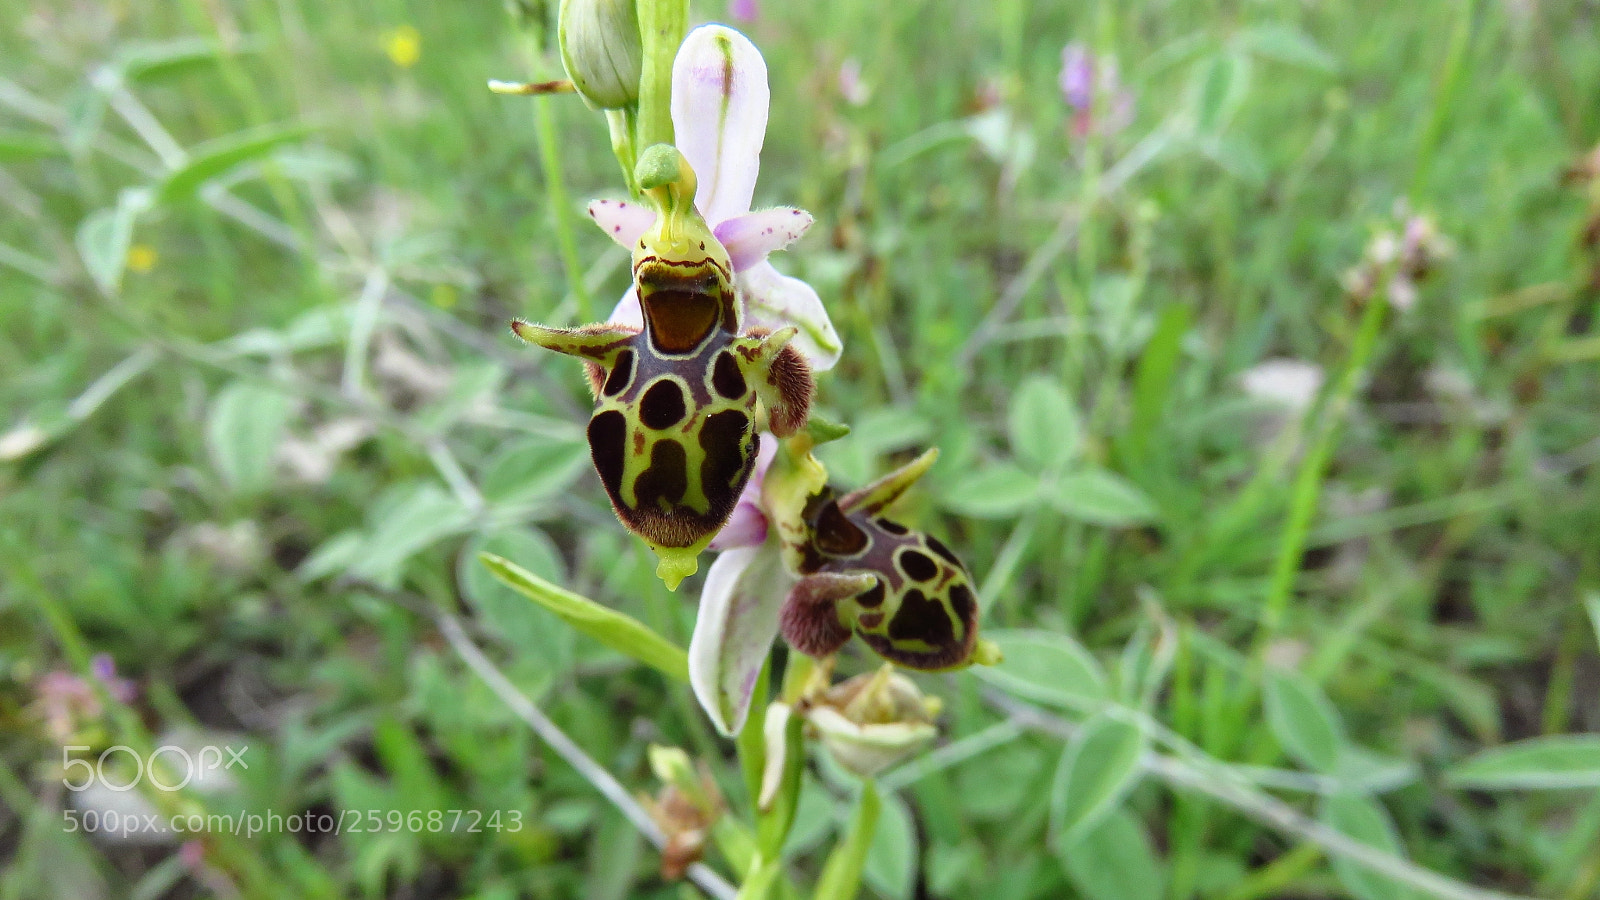 Canon PowerShot SX60 HS sample photo. Woodcock orchid ophrys scolopax photography